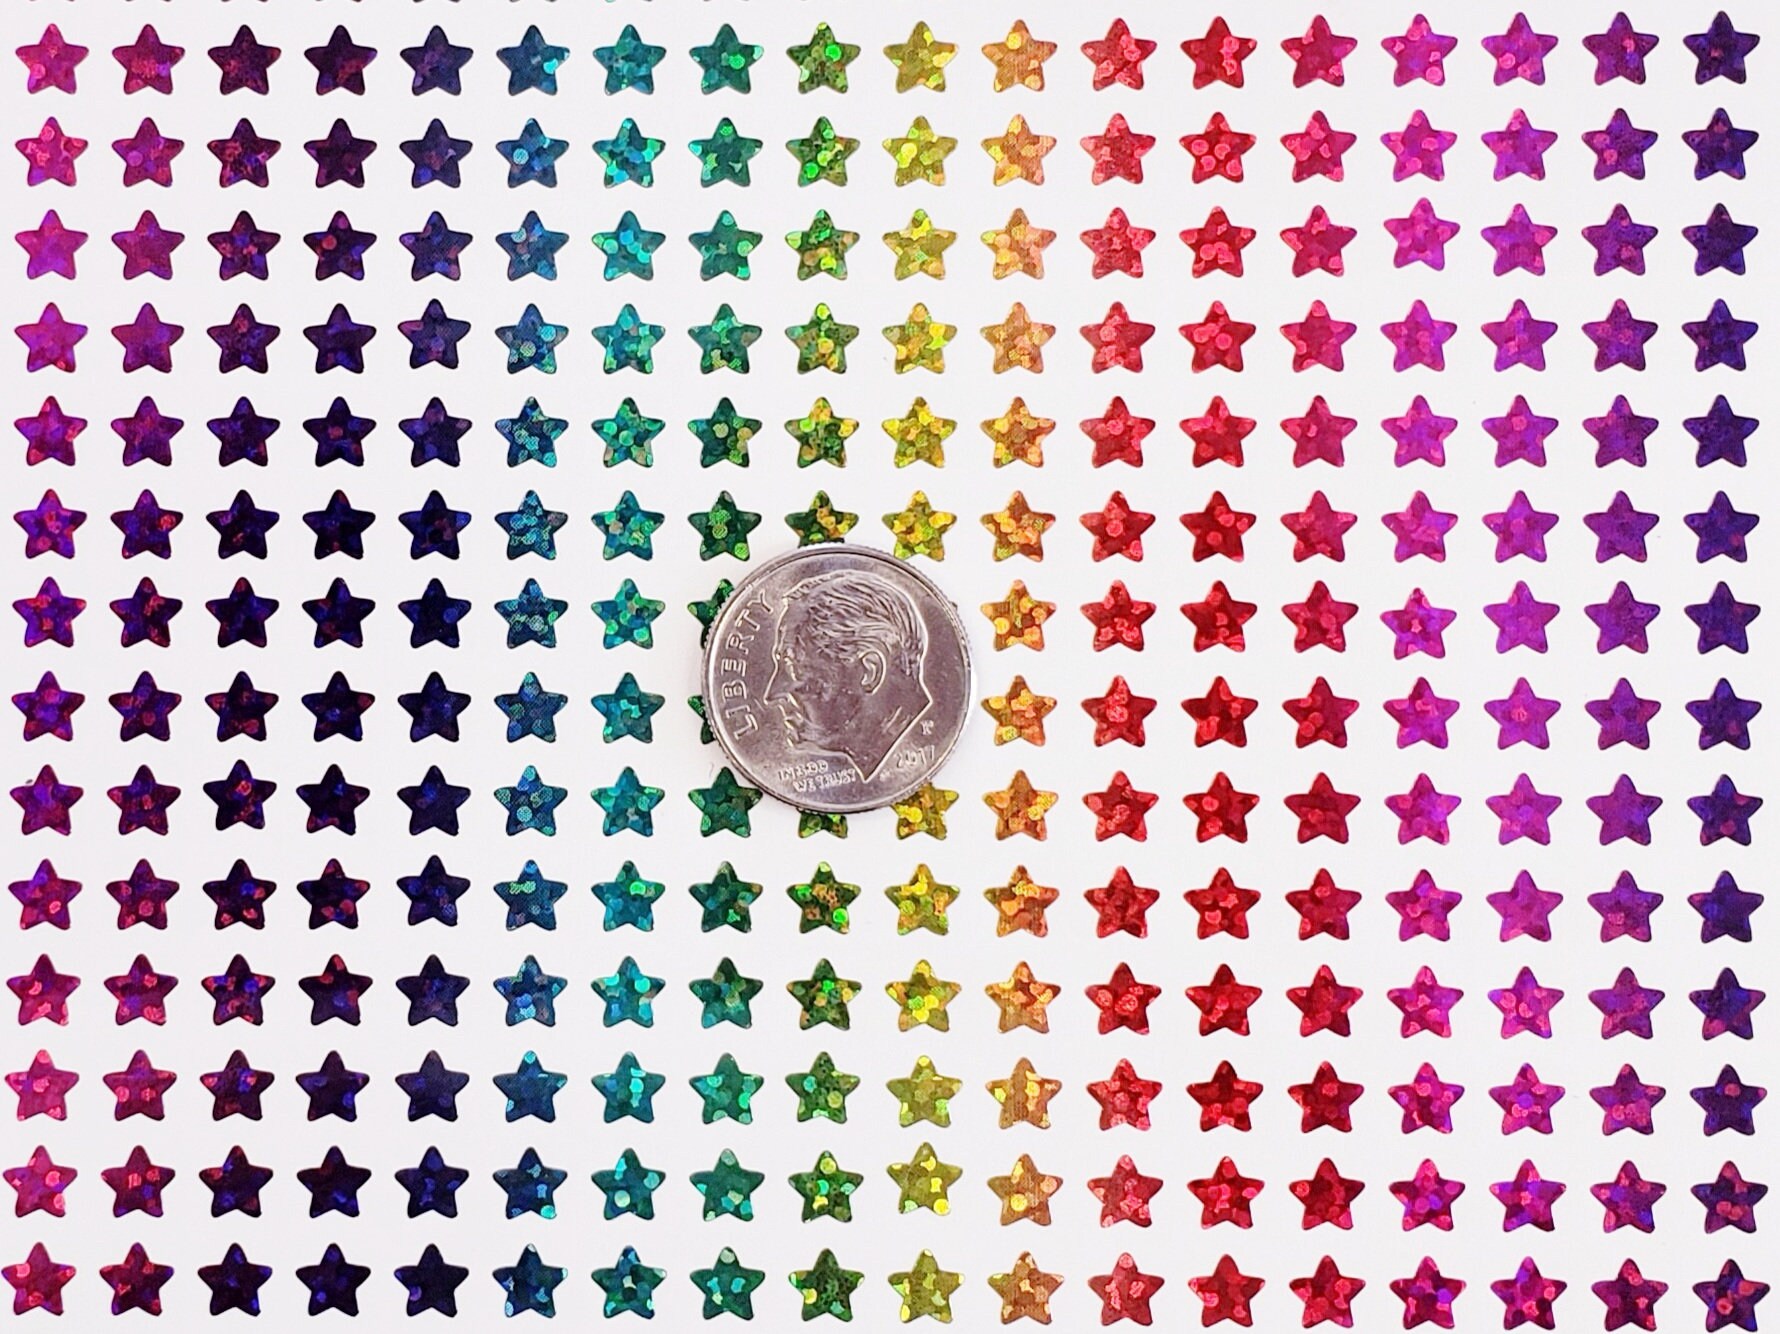 Extra Small Star Stickers Set of 490 Silver Holo Deco Glitter 